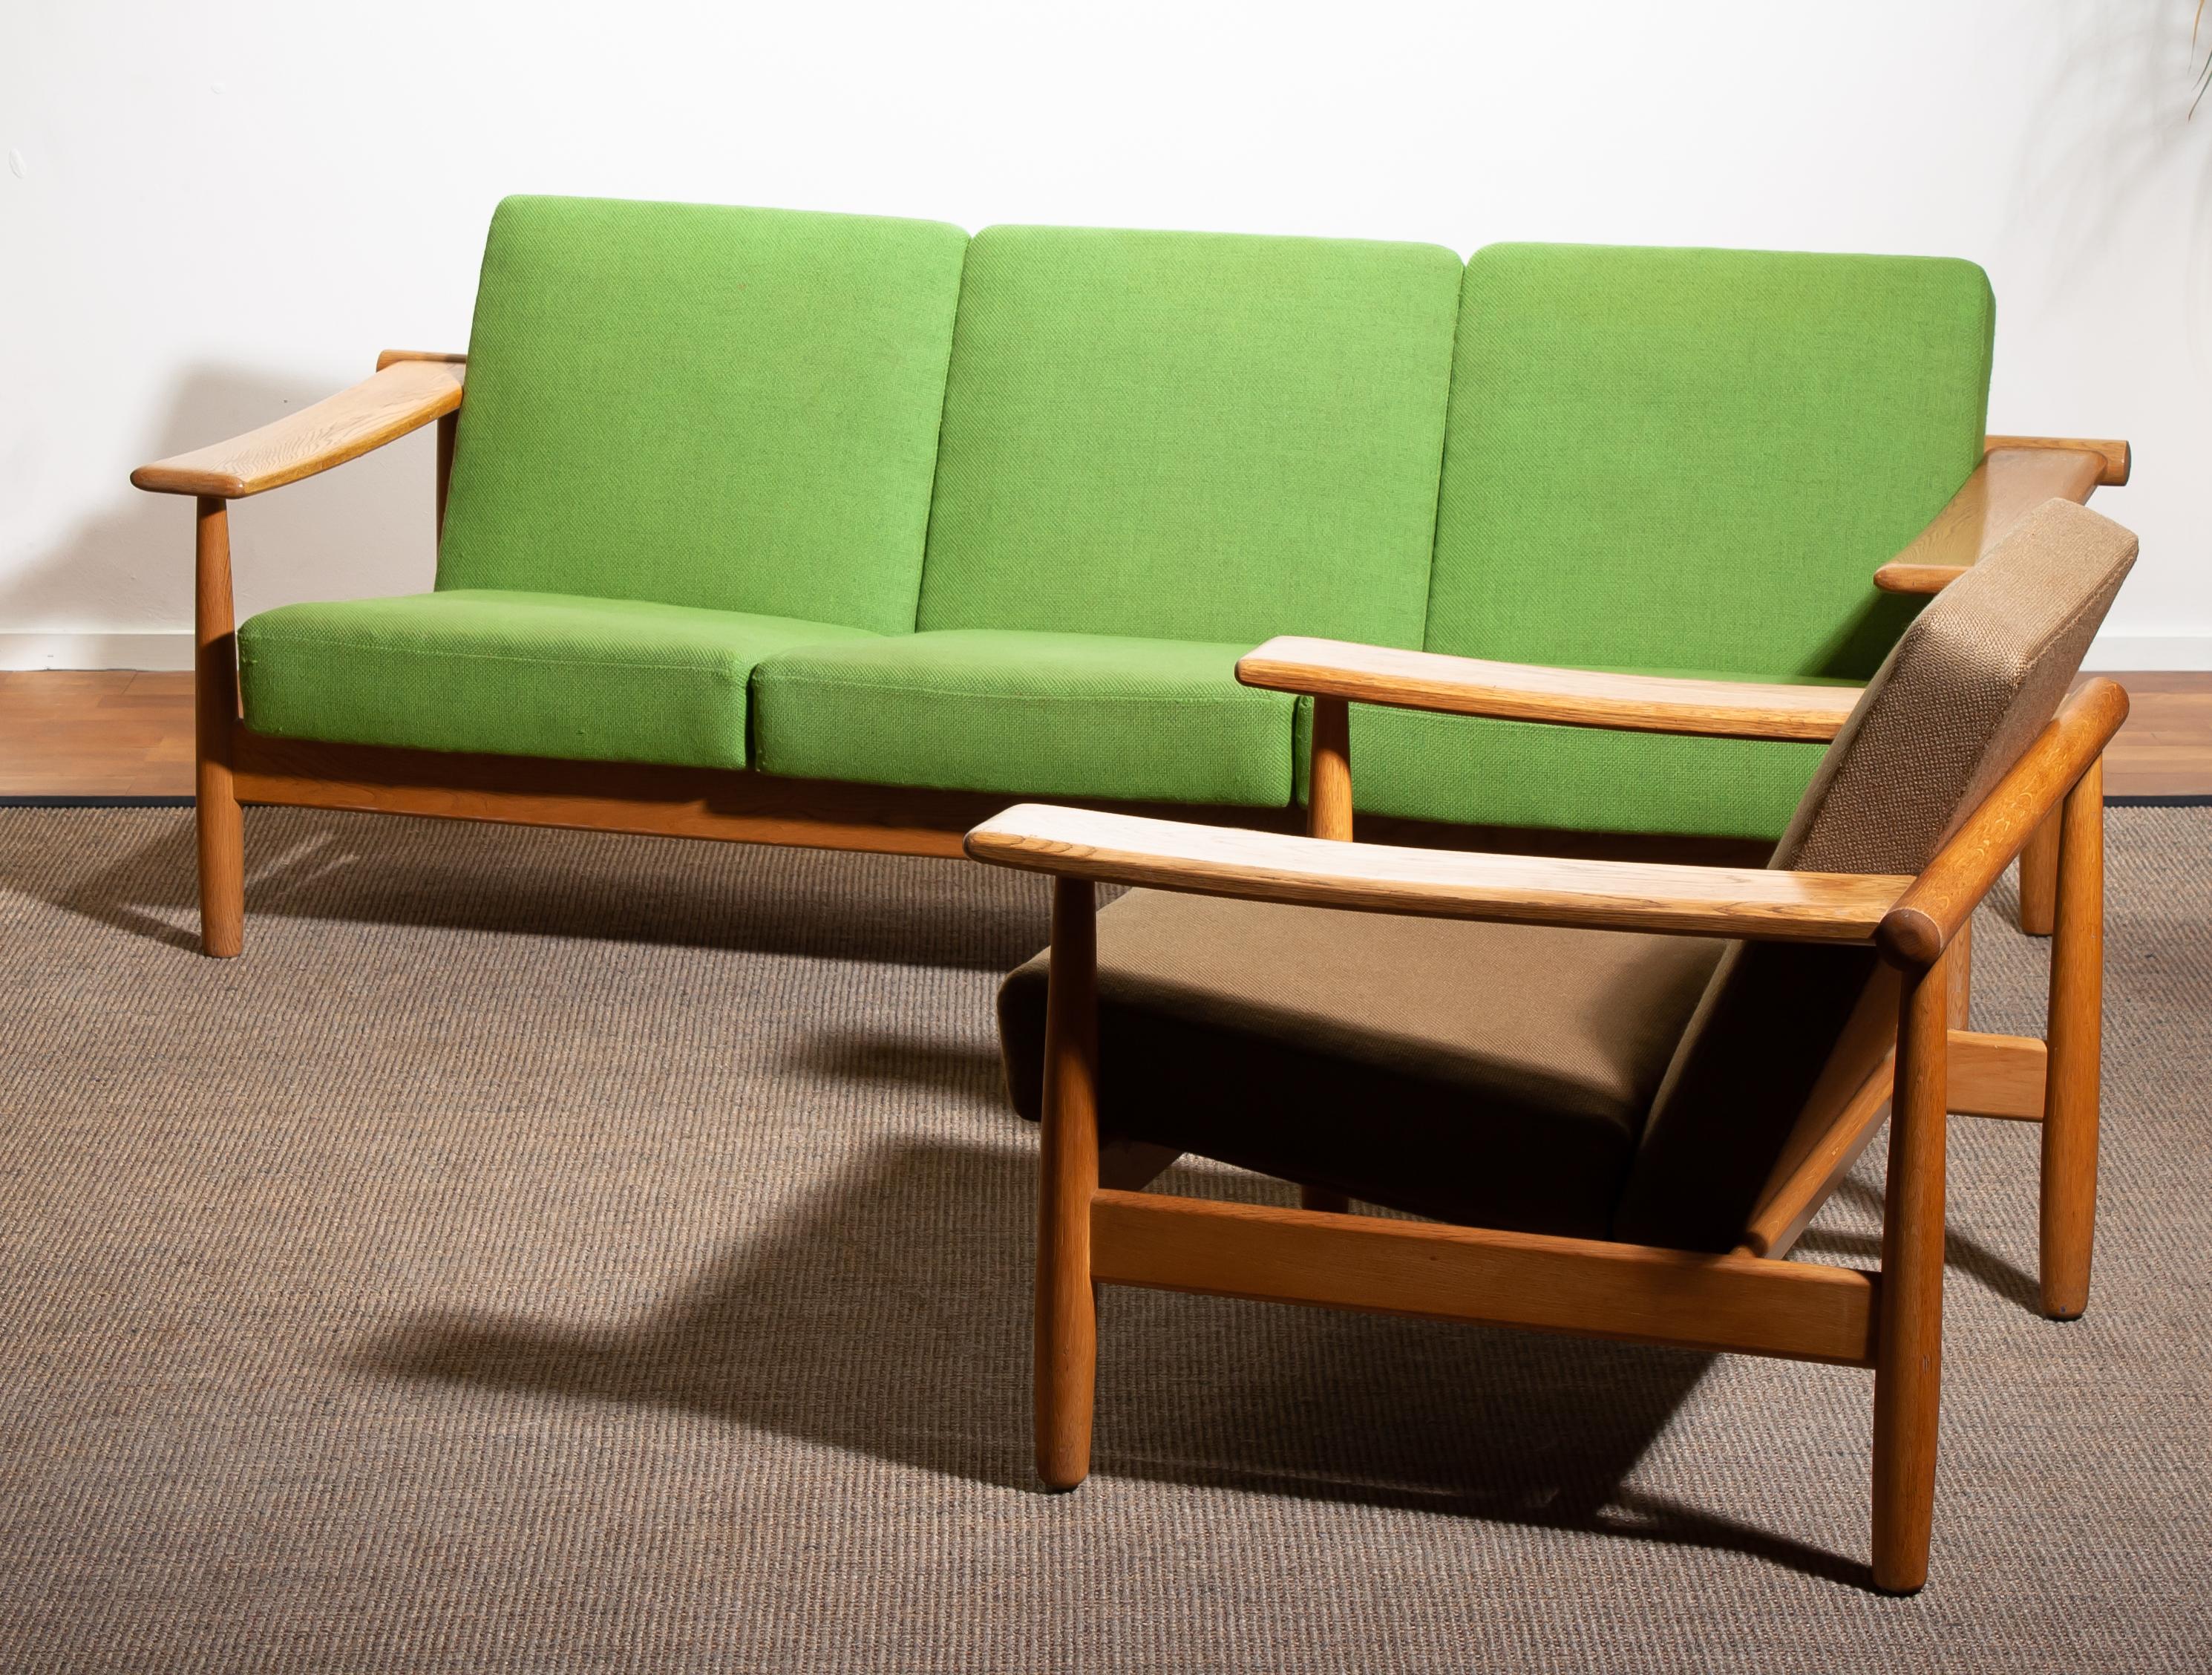 Beautiful oak sofa and lounge chair / living room set from the 1960s made in Denmark.
The oak frames are in good condition.
The fabric is in fair condition like the pictures shows.
  Beautiful set!